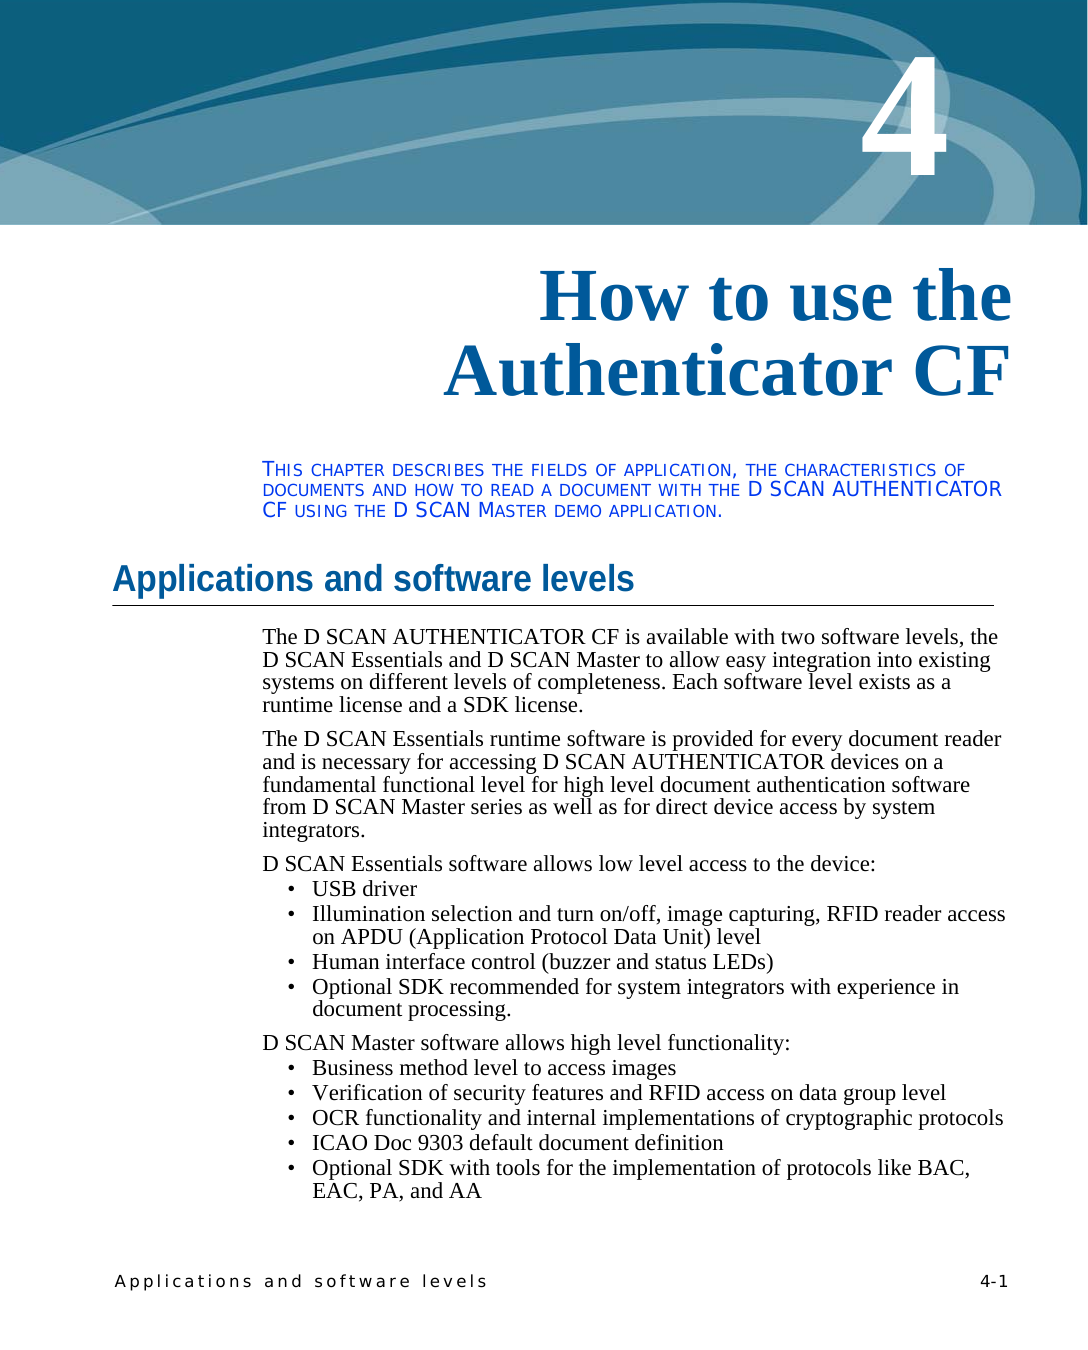 Applications and software levels    4-14Chapter 0How to use the Authenticator CFTHIS CHAPTER DESCRIBES THE FIELDS OF APPLICATION, THE CHARACTERISTICS OF DOCUMENTS AND HOW TO READ A DOCUMENT WITH THE D SCAN AUTHENTICATOR CF USING THE D SCAN MASTER DEMO APPLICATION.Applications and software levelsThe D SCAN AUTHENTICATOR CF is available with two software levels, the D SCAN Essentials and D SCAN Master to allow easy integration into existing systems on different levels of completeness. Each software level exists as a runtime license and a SDK license.The D SCAN Essentials runtime software is provided for every document reader and is necessary for accessing D SCAN AUTHENTICATOR devices on a fundamental functional level for high level document authentication software from D SCAN Master series as well as for direct device access by system integrators.D SCAN Essentials software allows low level access to the device: •USB driver• Illumination selection and turn on/off, image capturing, RFID reader access on APDU (Application Protocol Data Unit) level• Human interface control (buzzer and status LEDs)• Optional SDK recommended for system integrators with experience in document processing.D SCAN Master software allows high level functionality:• Business method level to access images• Verification of security features and RFID access on data group level• OCR functionality and internal implementations of cryptographic protocols• ICAO Doc 9303 default document definition• Optional SDK with tools for the implementation of protocols like BAC, EAC, PA, and AA